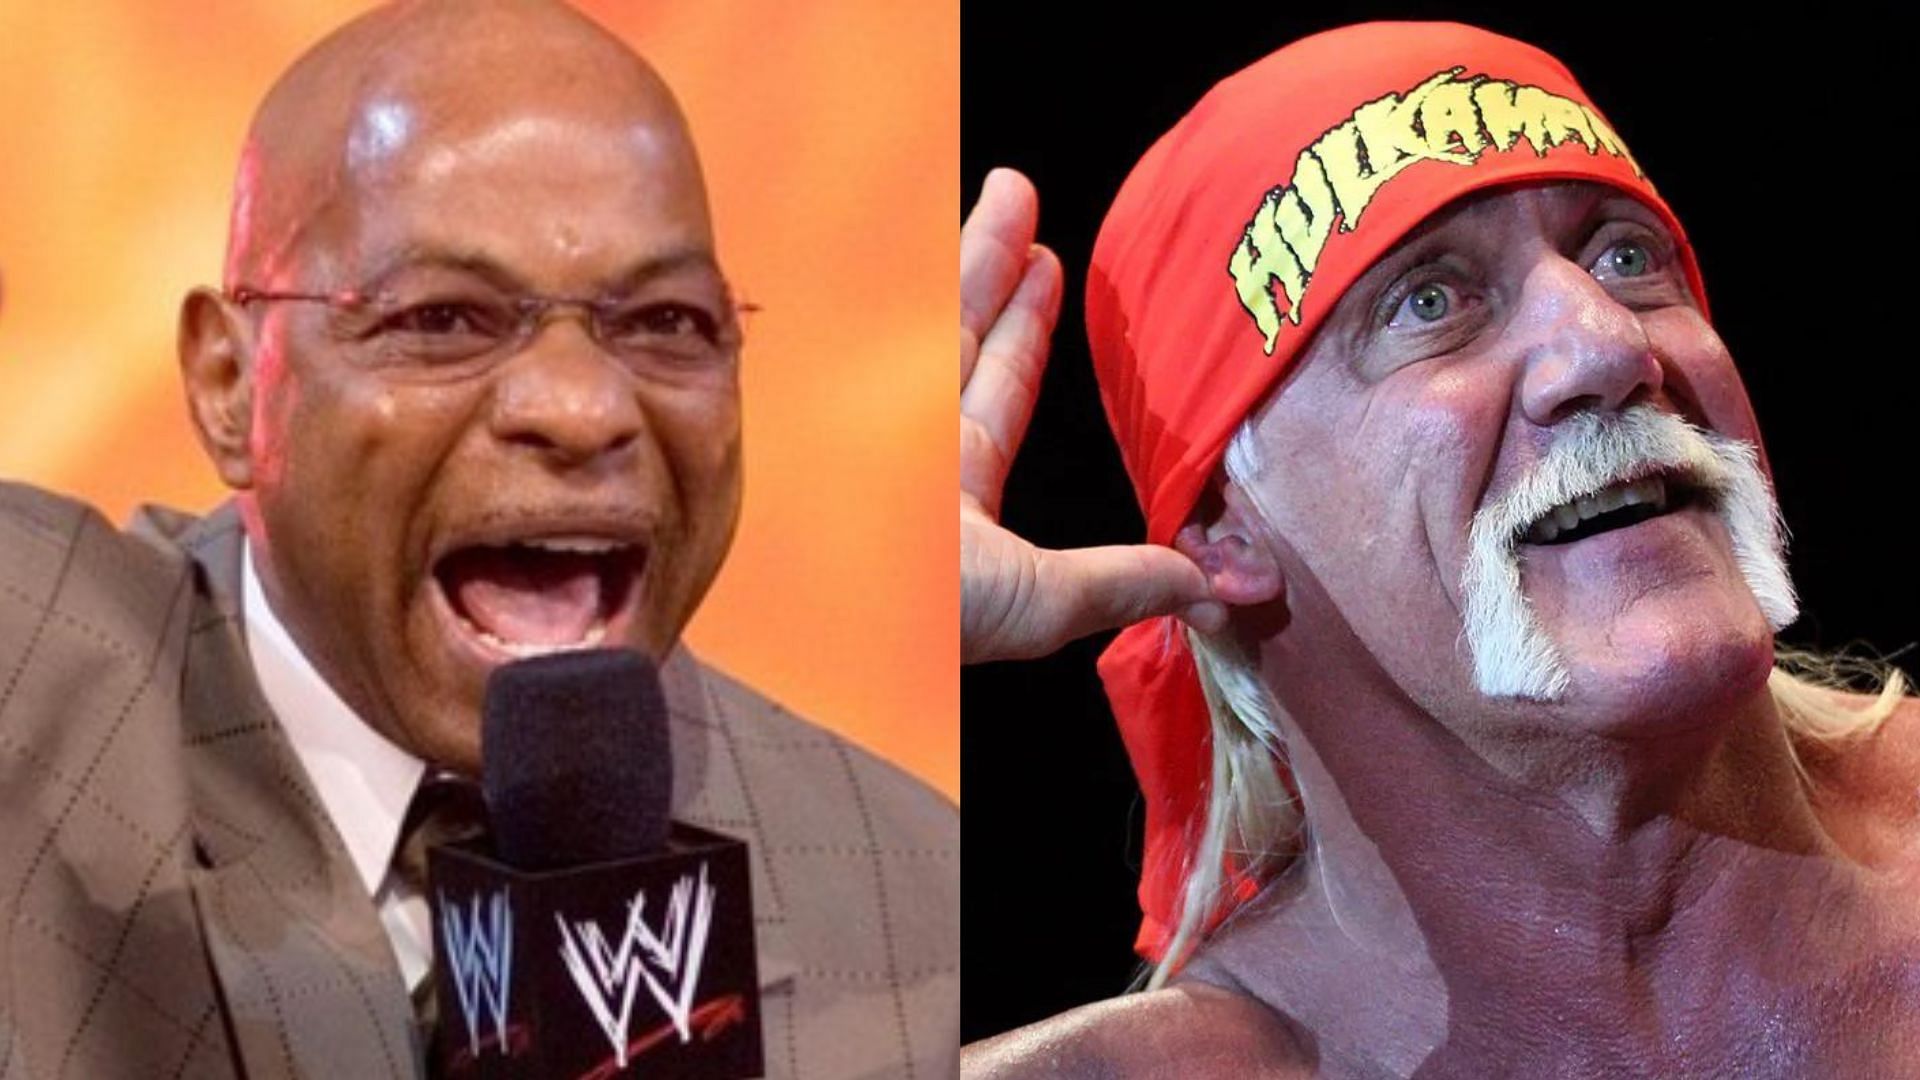 Teddy Long has high hopes for one of his personal favorite wrestlers